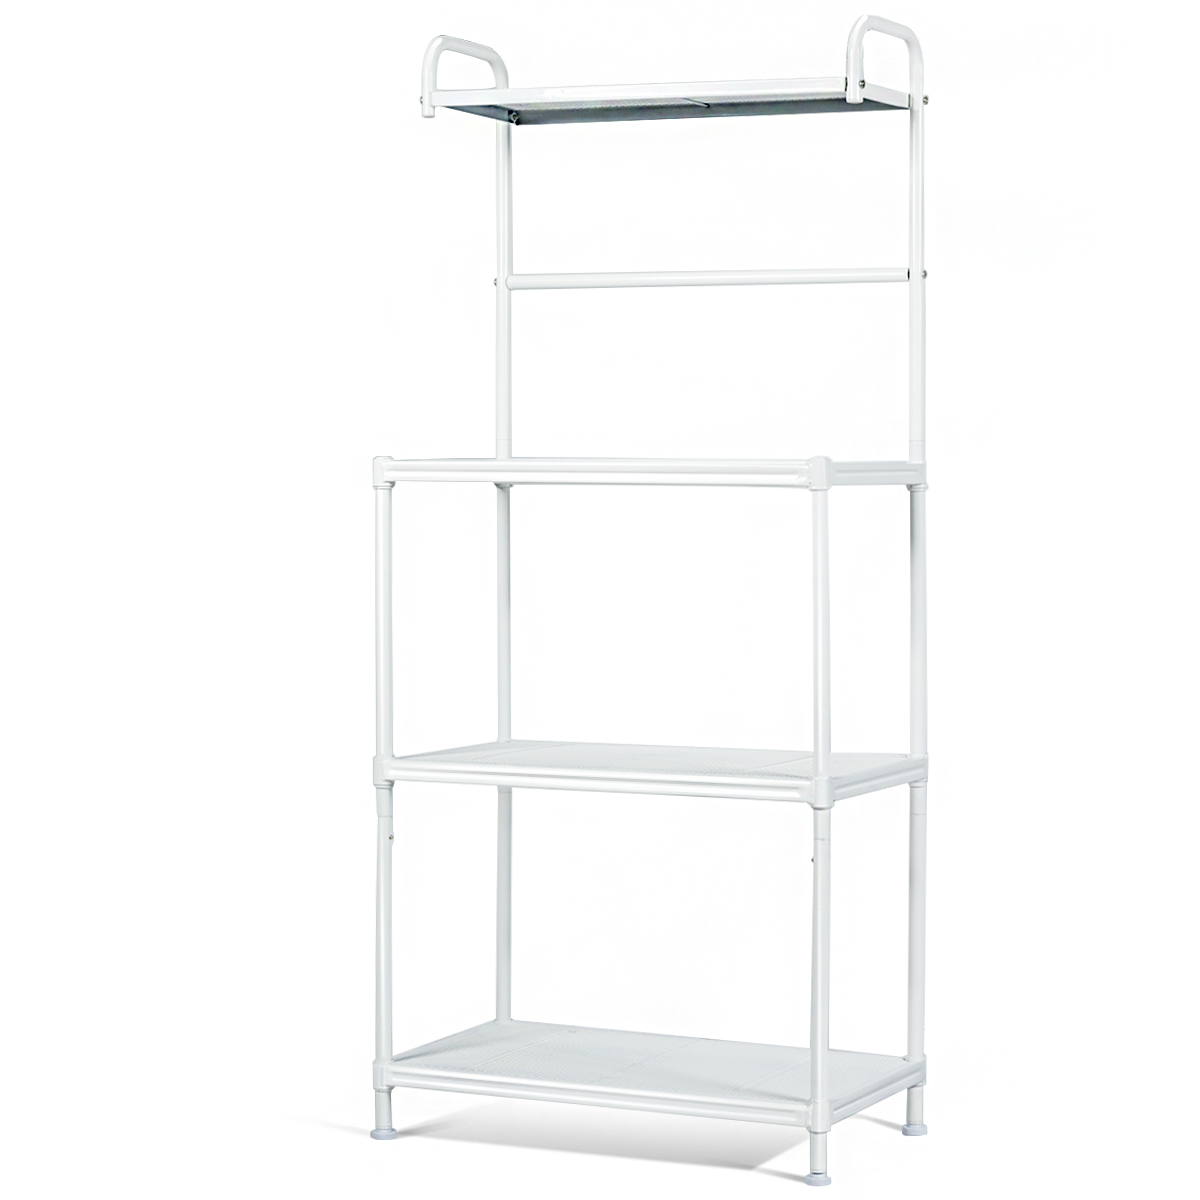 4Tier_Microwave_Oven_Shelf_with_Foot_Pads_and_Adjustable_Height_White-8.jpg